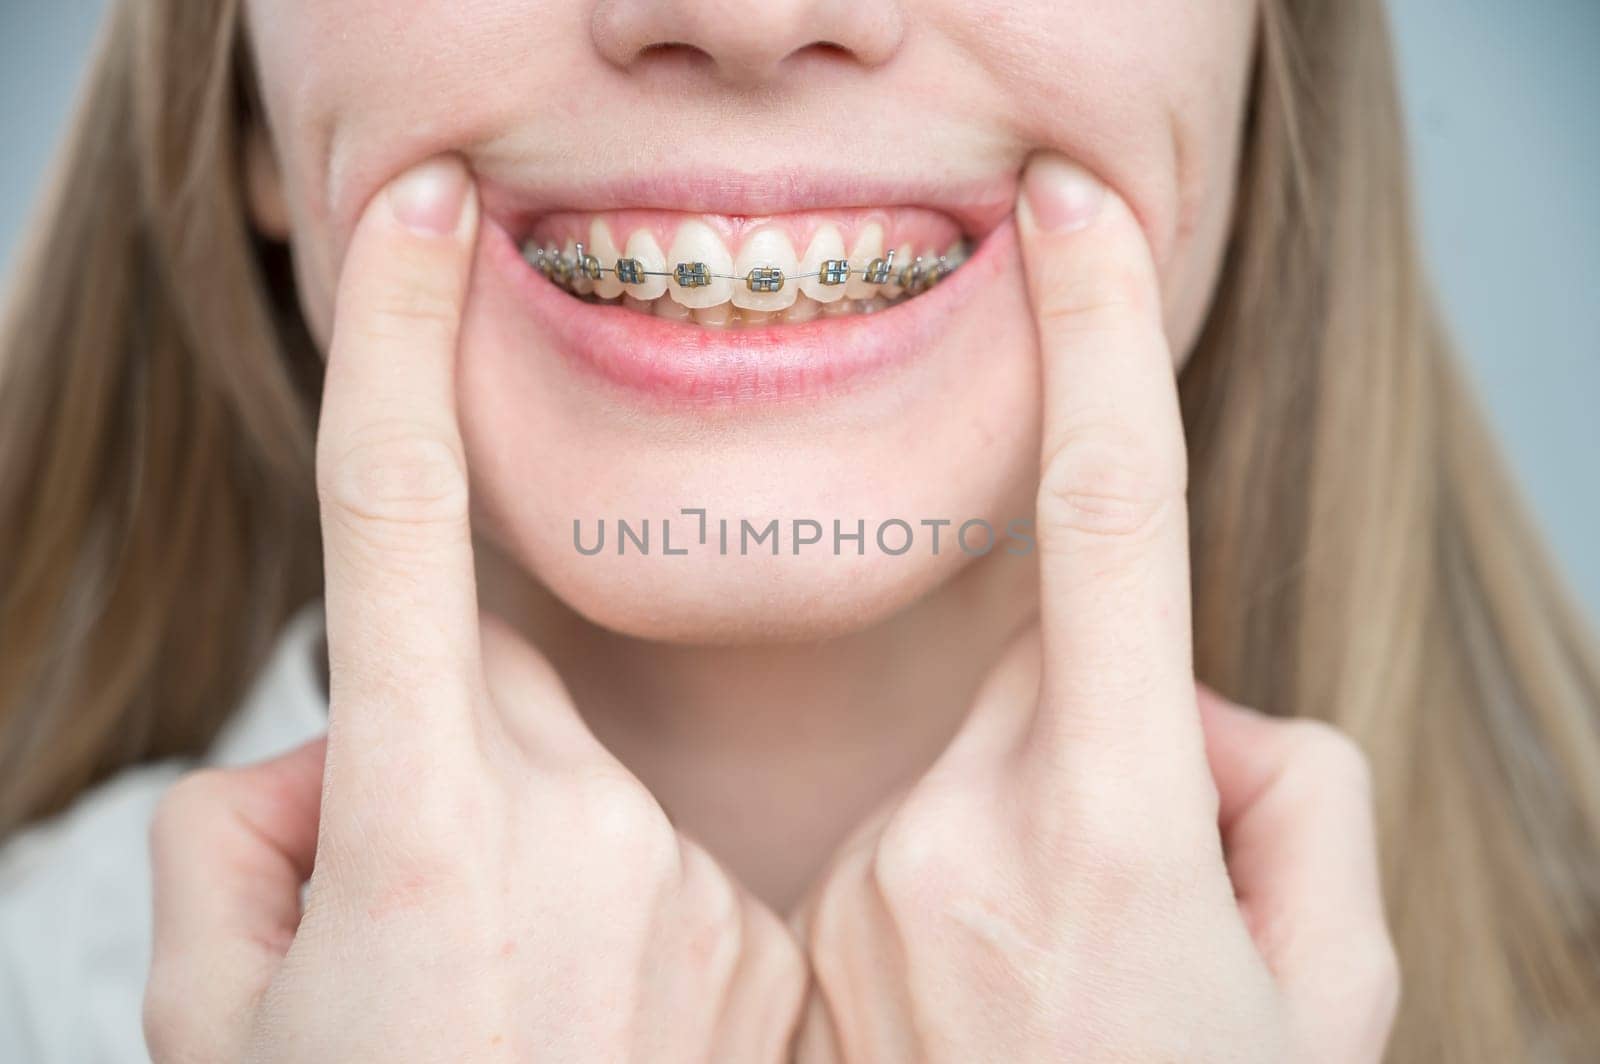 Close-up of a young woman's smile with metal braces on her teeth. Correction of bite.